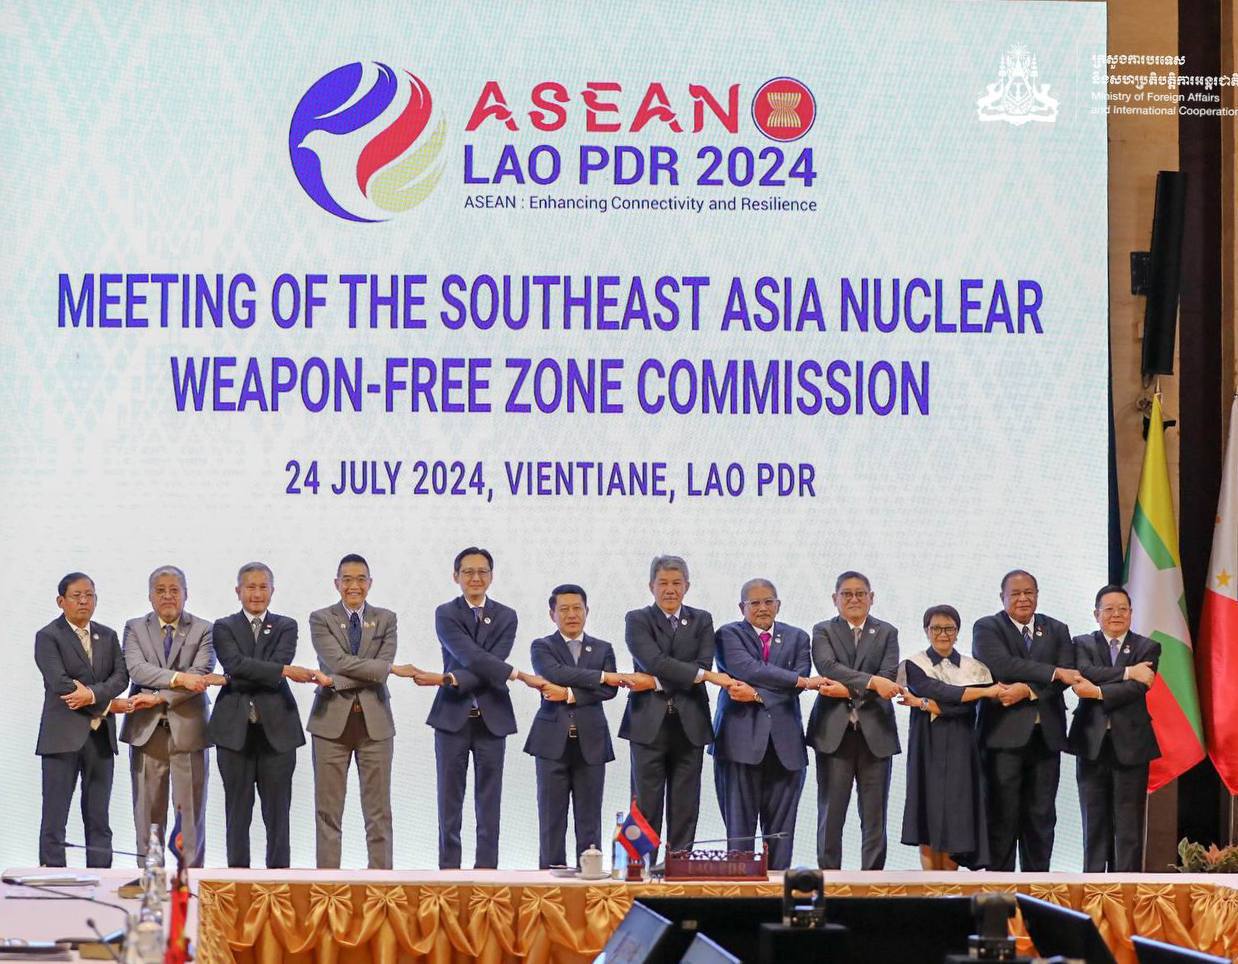 Outcomes of the Meeting of the Commission of the Southeast Asia Nuclear-Weapon-Free Zone and ASEAN Foreign Ministers’ Interface Meeting with ASEAN Intergovernmental Commission on Human Rights Representatives